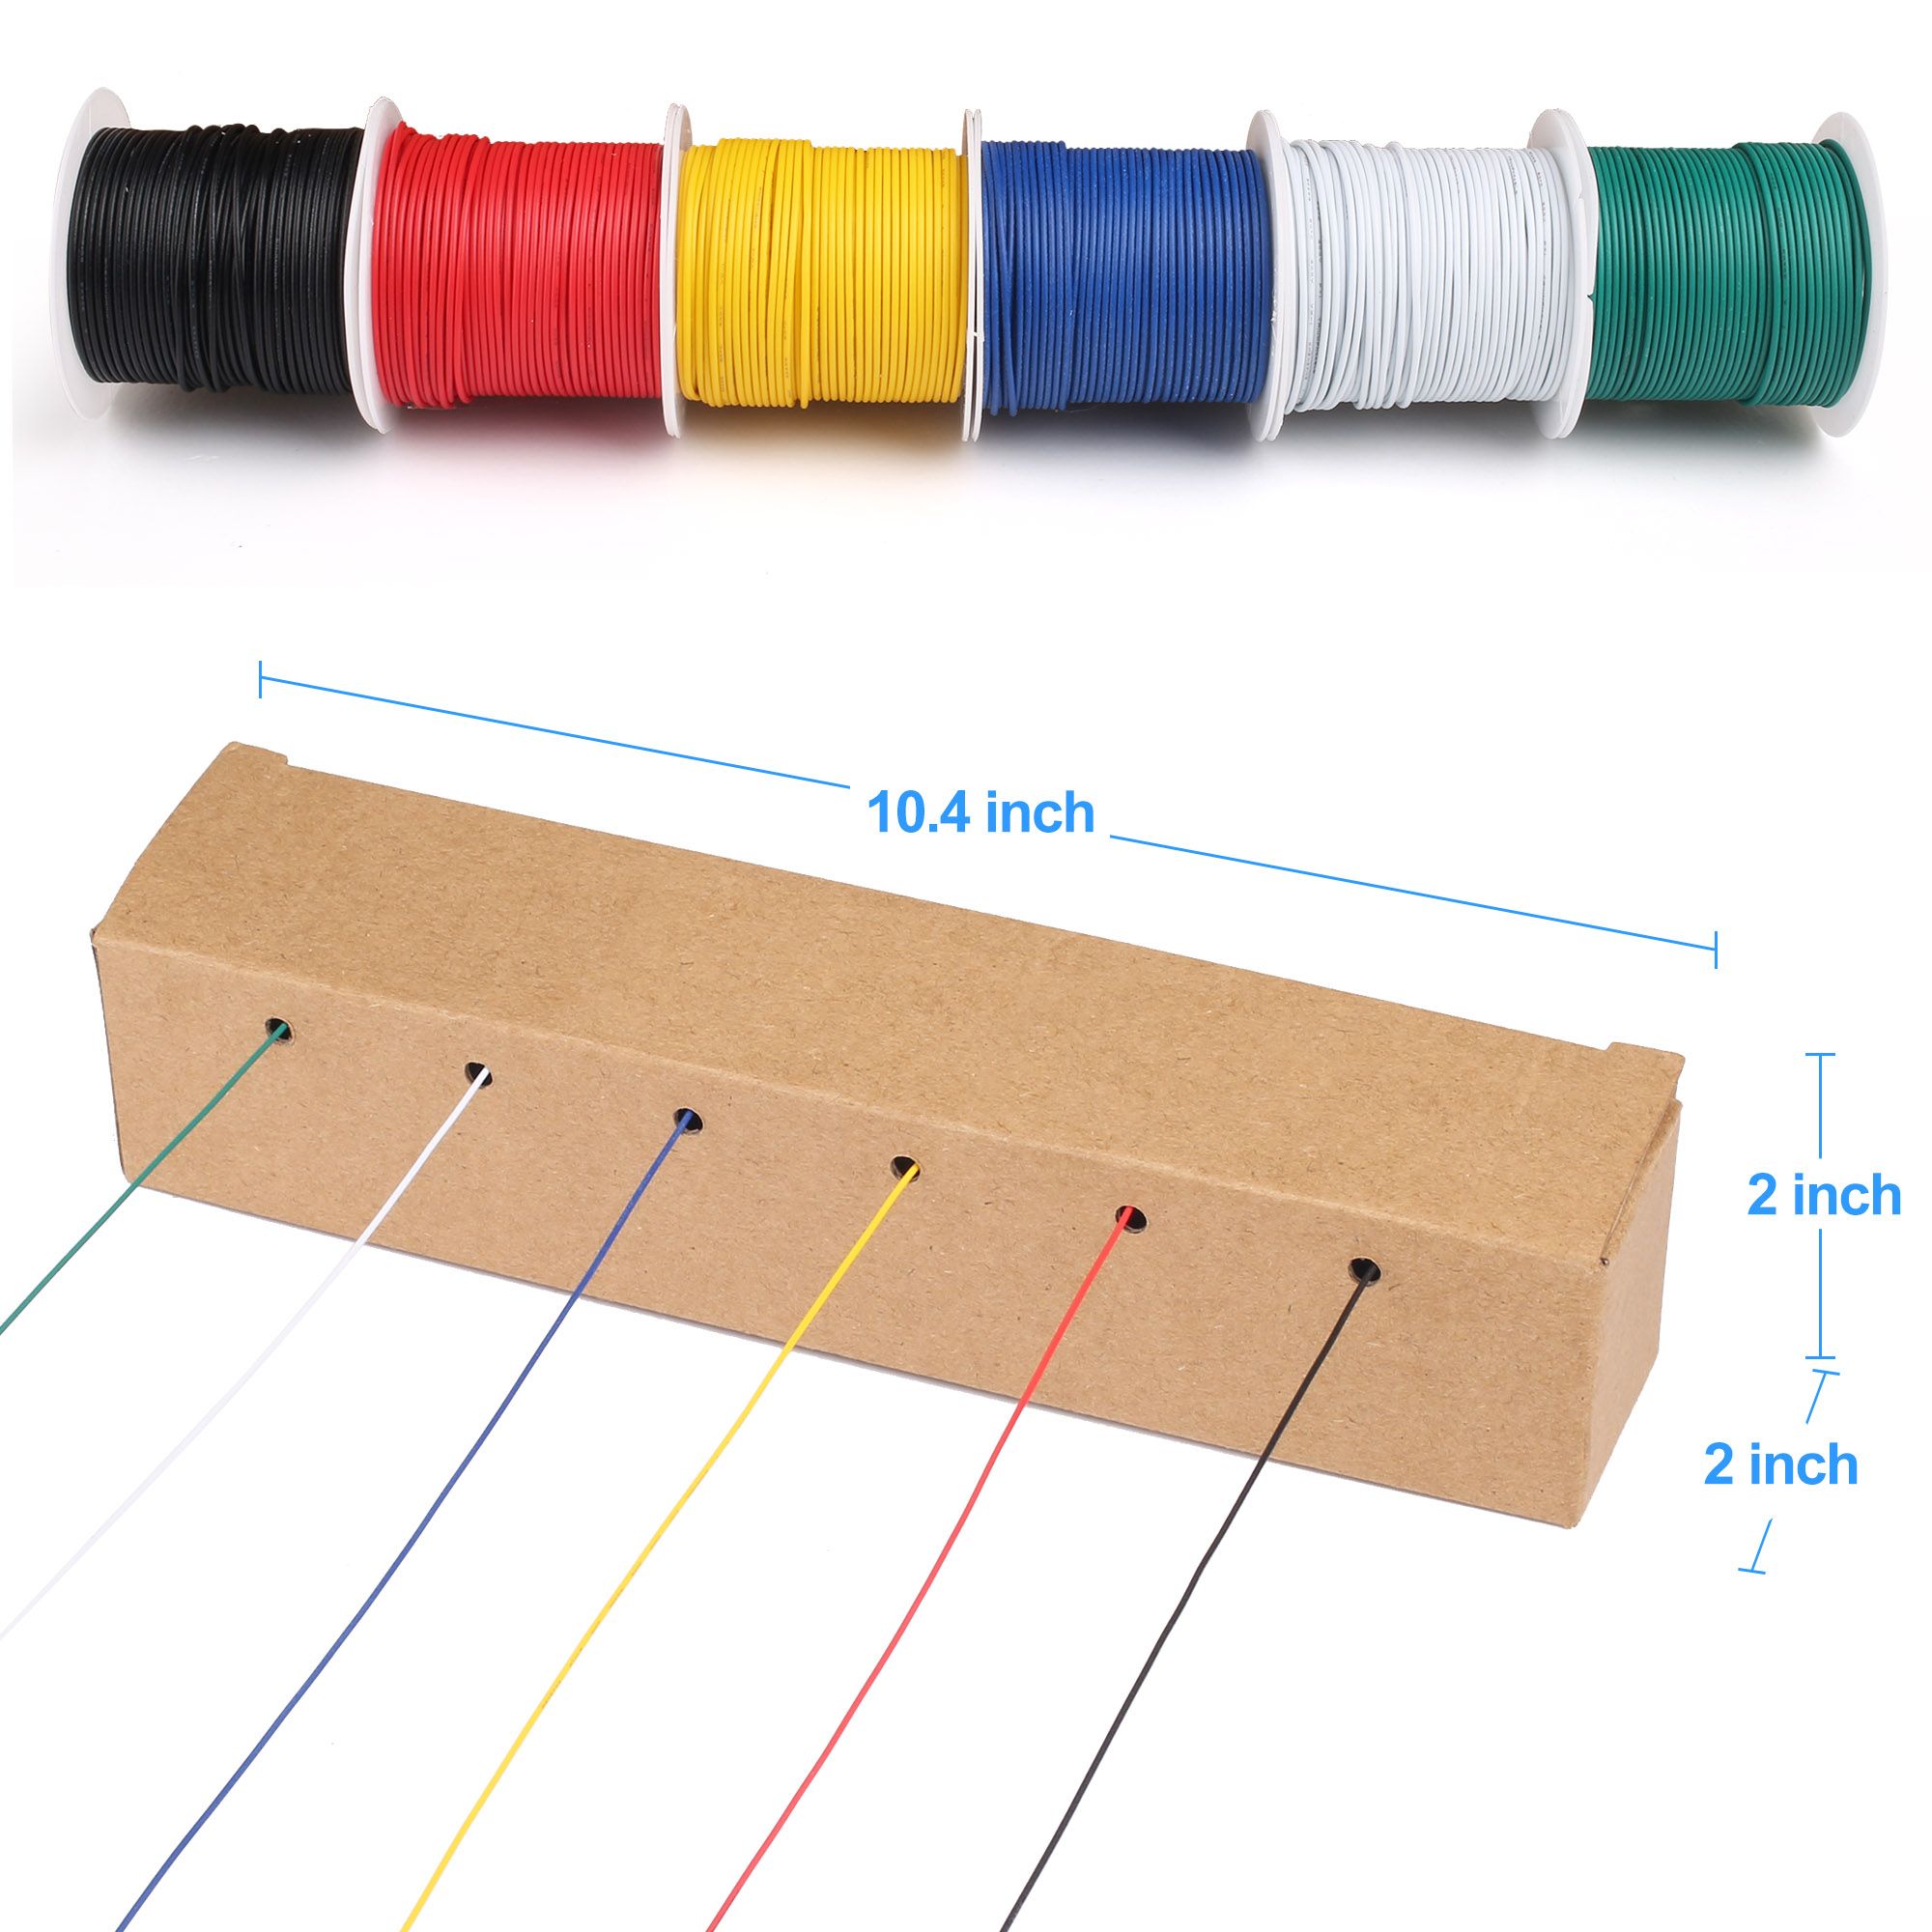 LotFancy 30AWG Stranded Wire, 6 Colors (30 feet/9 m Each) Electrical Wire, UL Listed - image 4 of 8